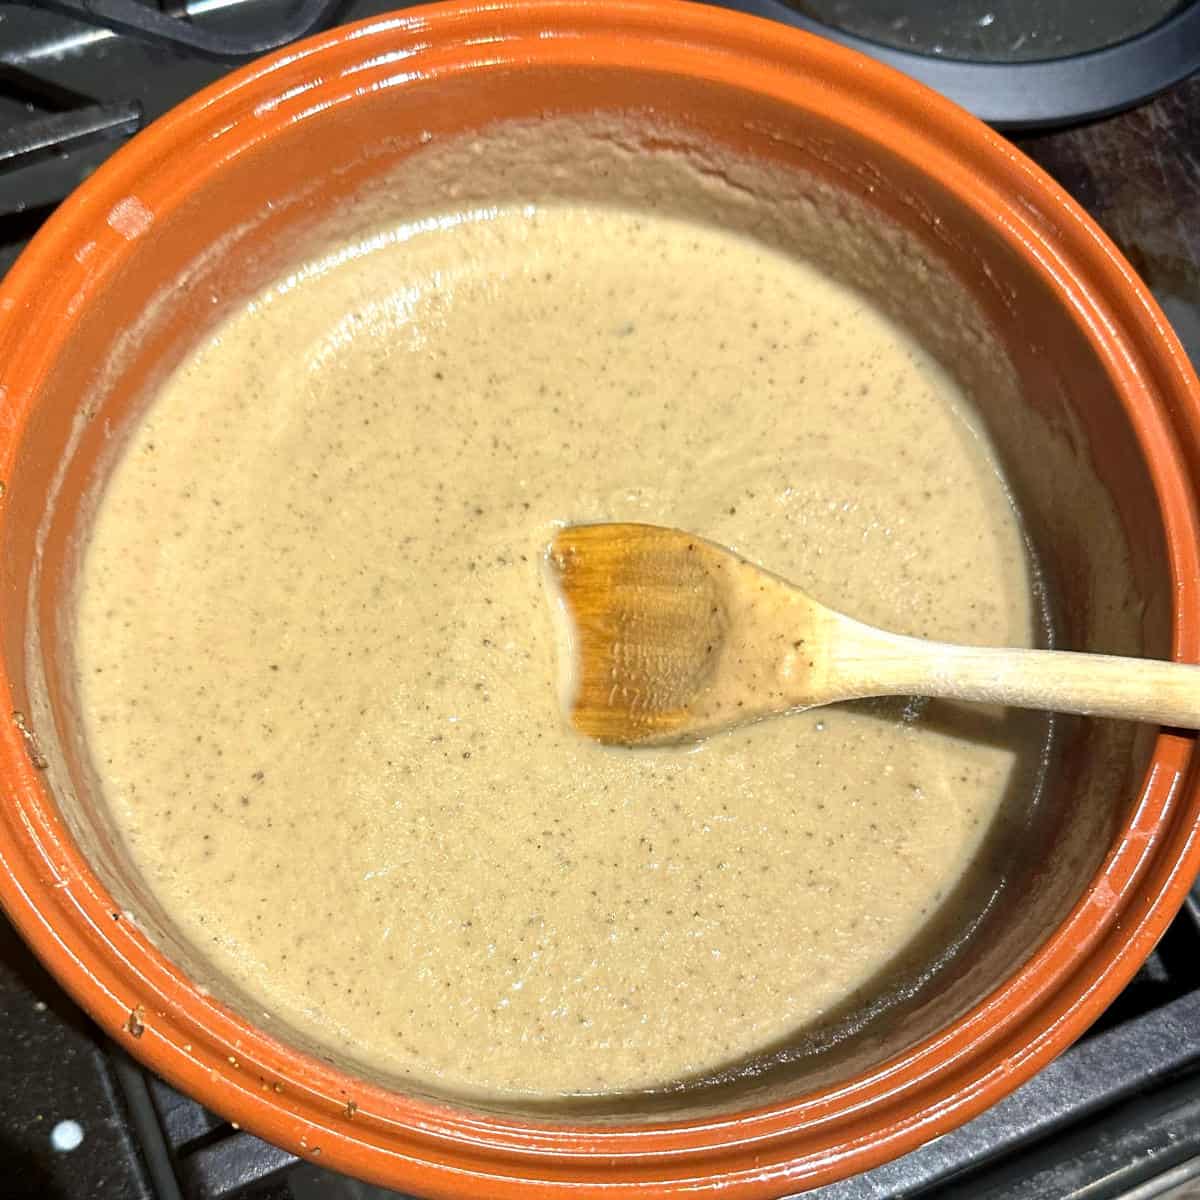 Eggplant soup cooking in pot with wooden ladle.